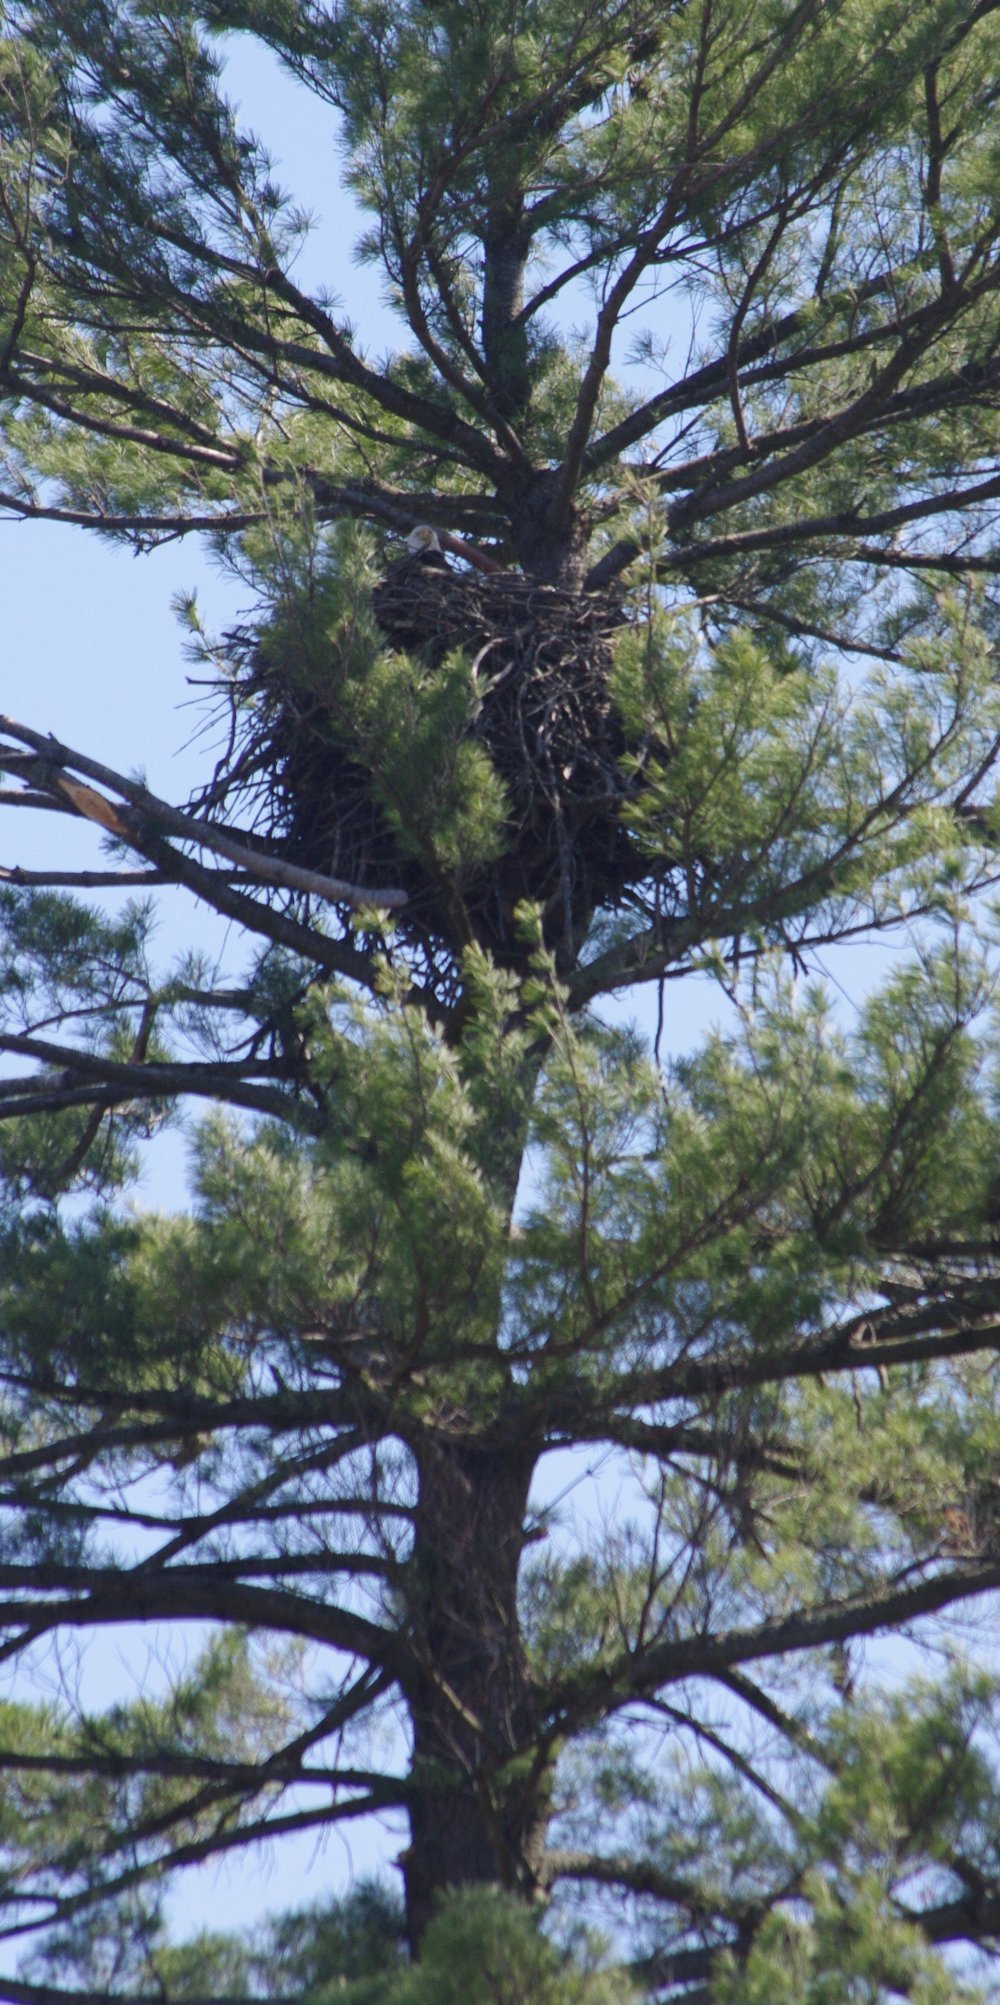 eagle+head+poking+up+from+nest.jpg